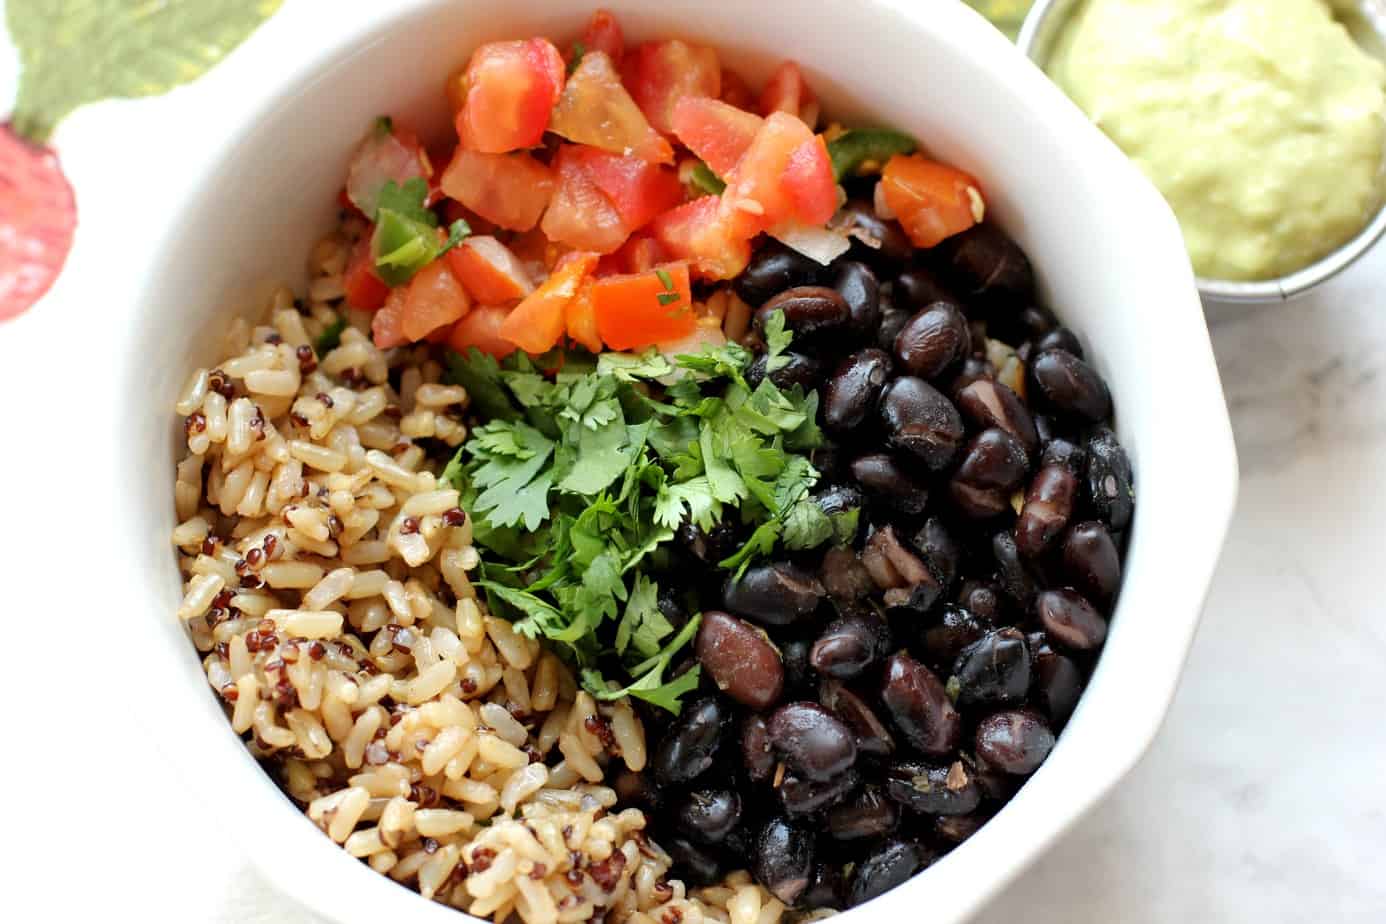 Quick and Easy Burrito Bowls with Avocado Lime Sauce